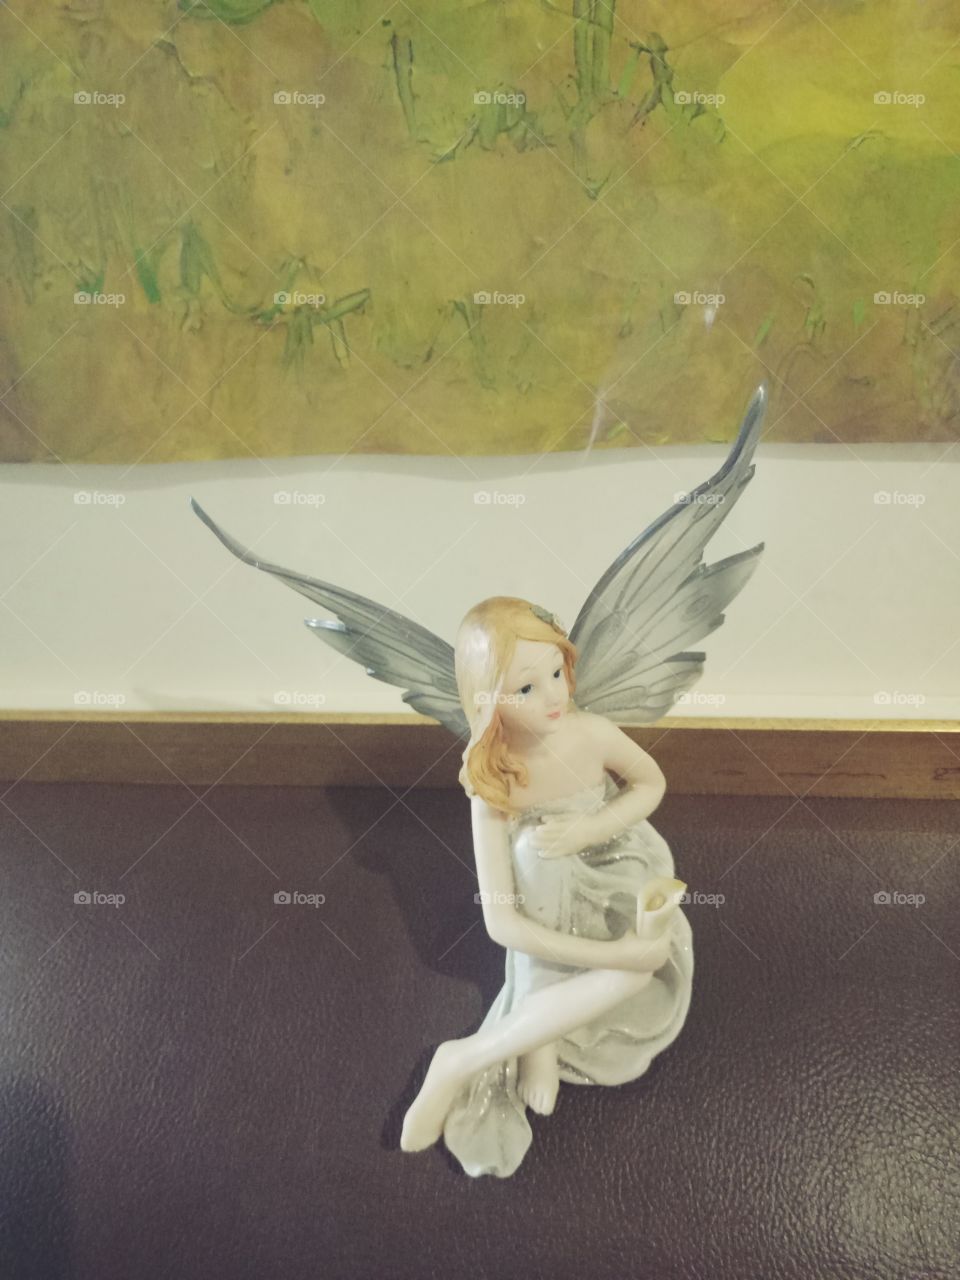 Excellent. 
A sitting beautiful figurine angel gifts.